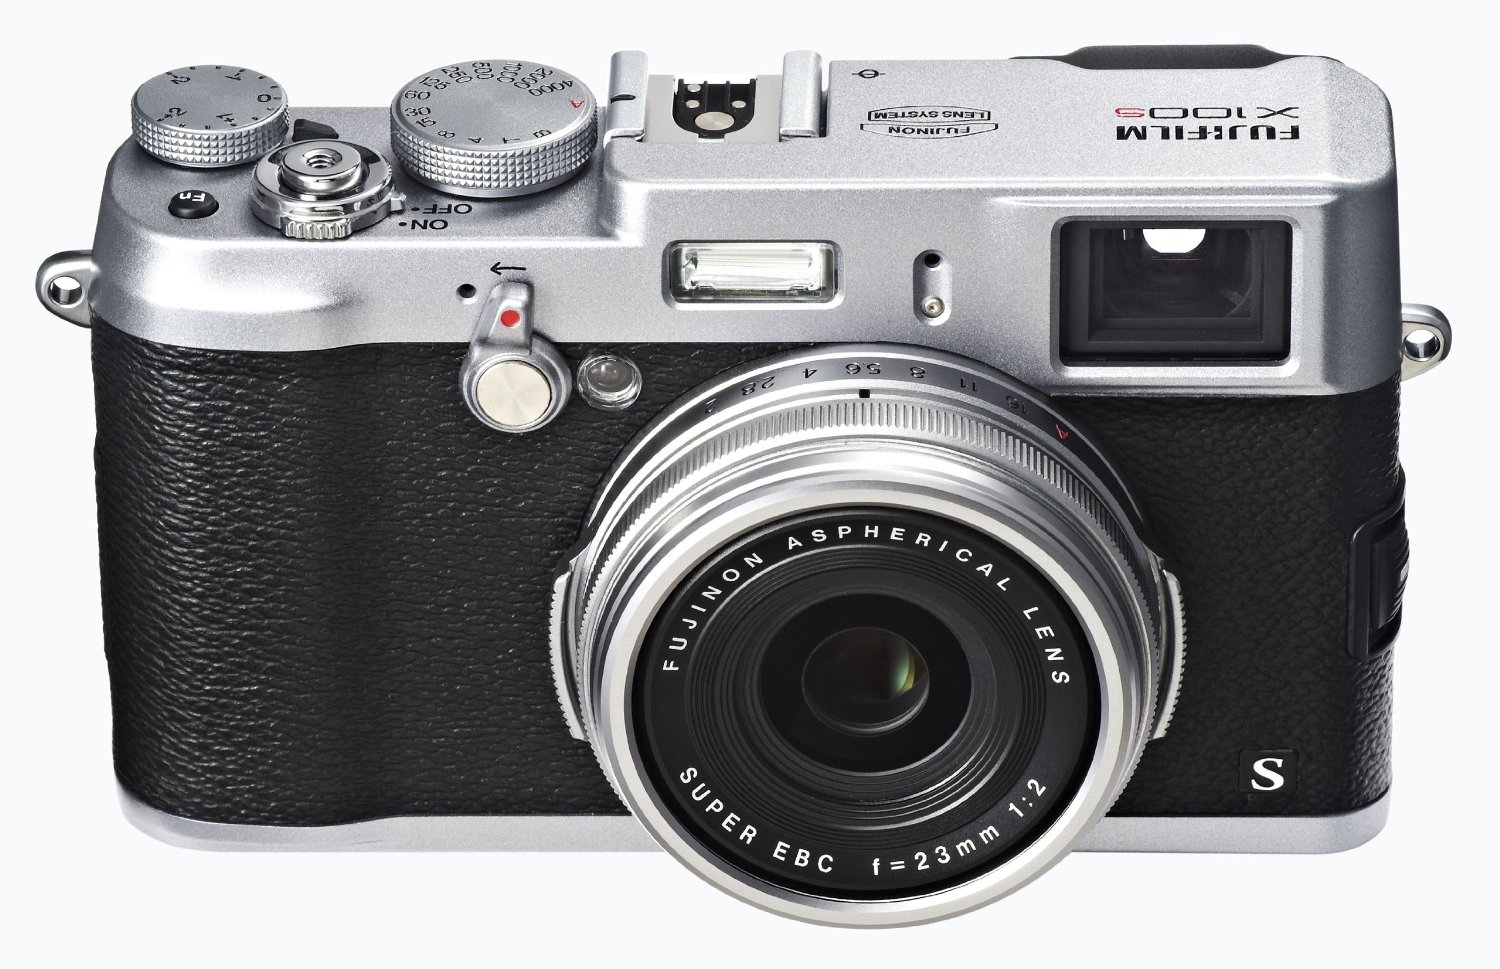 Fujifilm x100s Review: Is It Worth Considering in 2020?